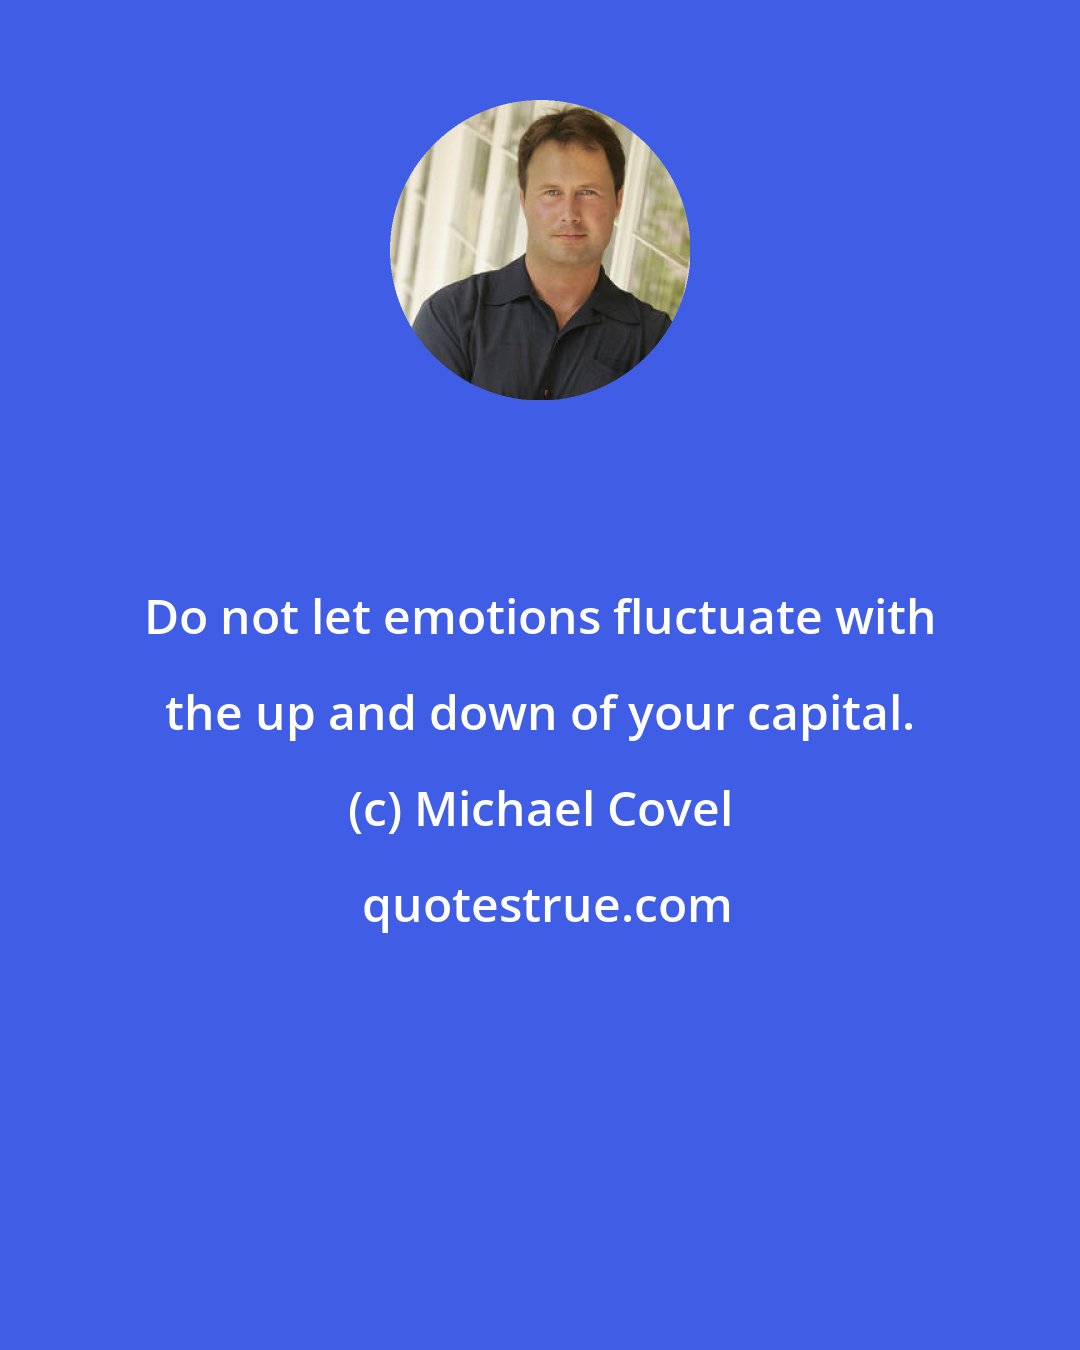 Michael Covel: Do not let emotions fluctuate with the up and down of your capital.